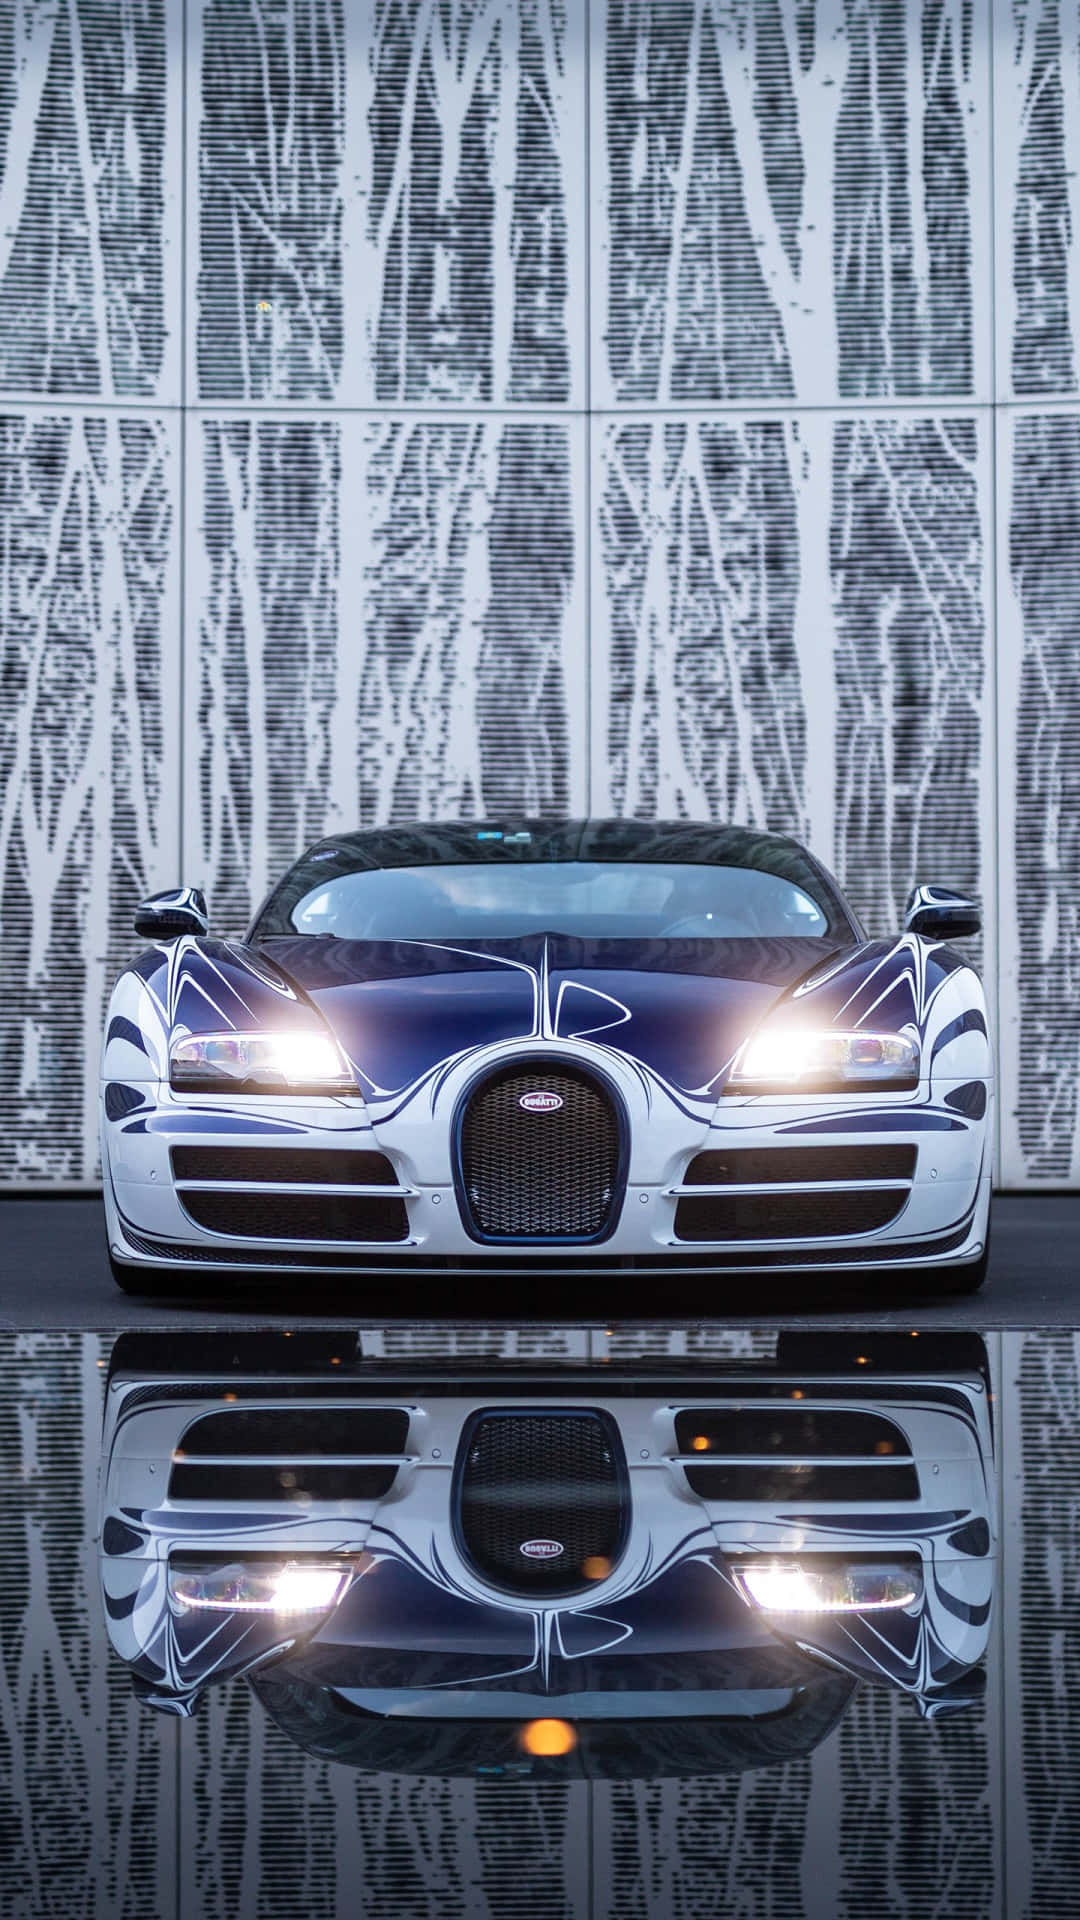 "A Richly Deserved Luxury: The Magnificent Bugatti Car" Wallpaper